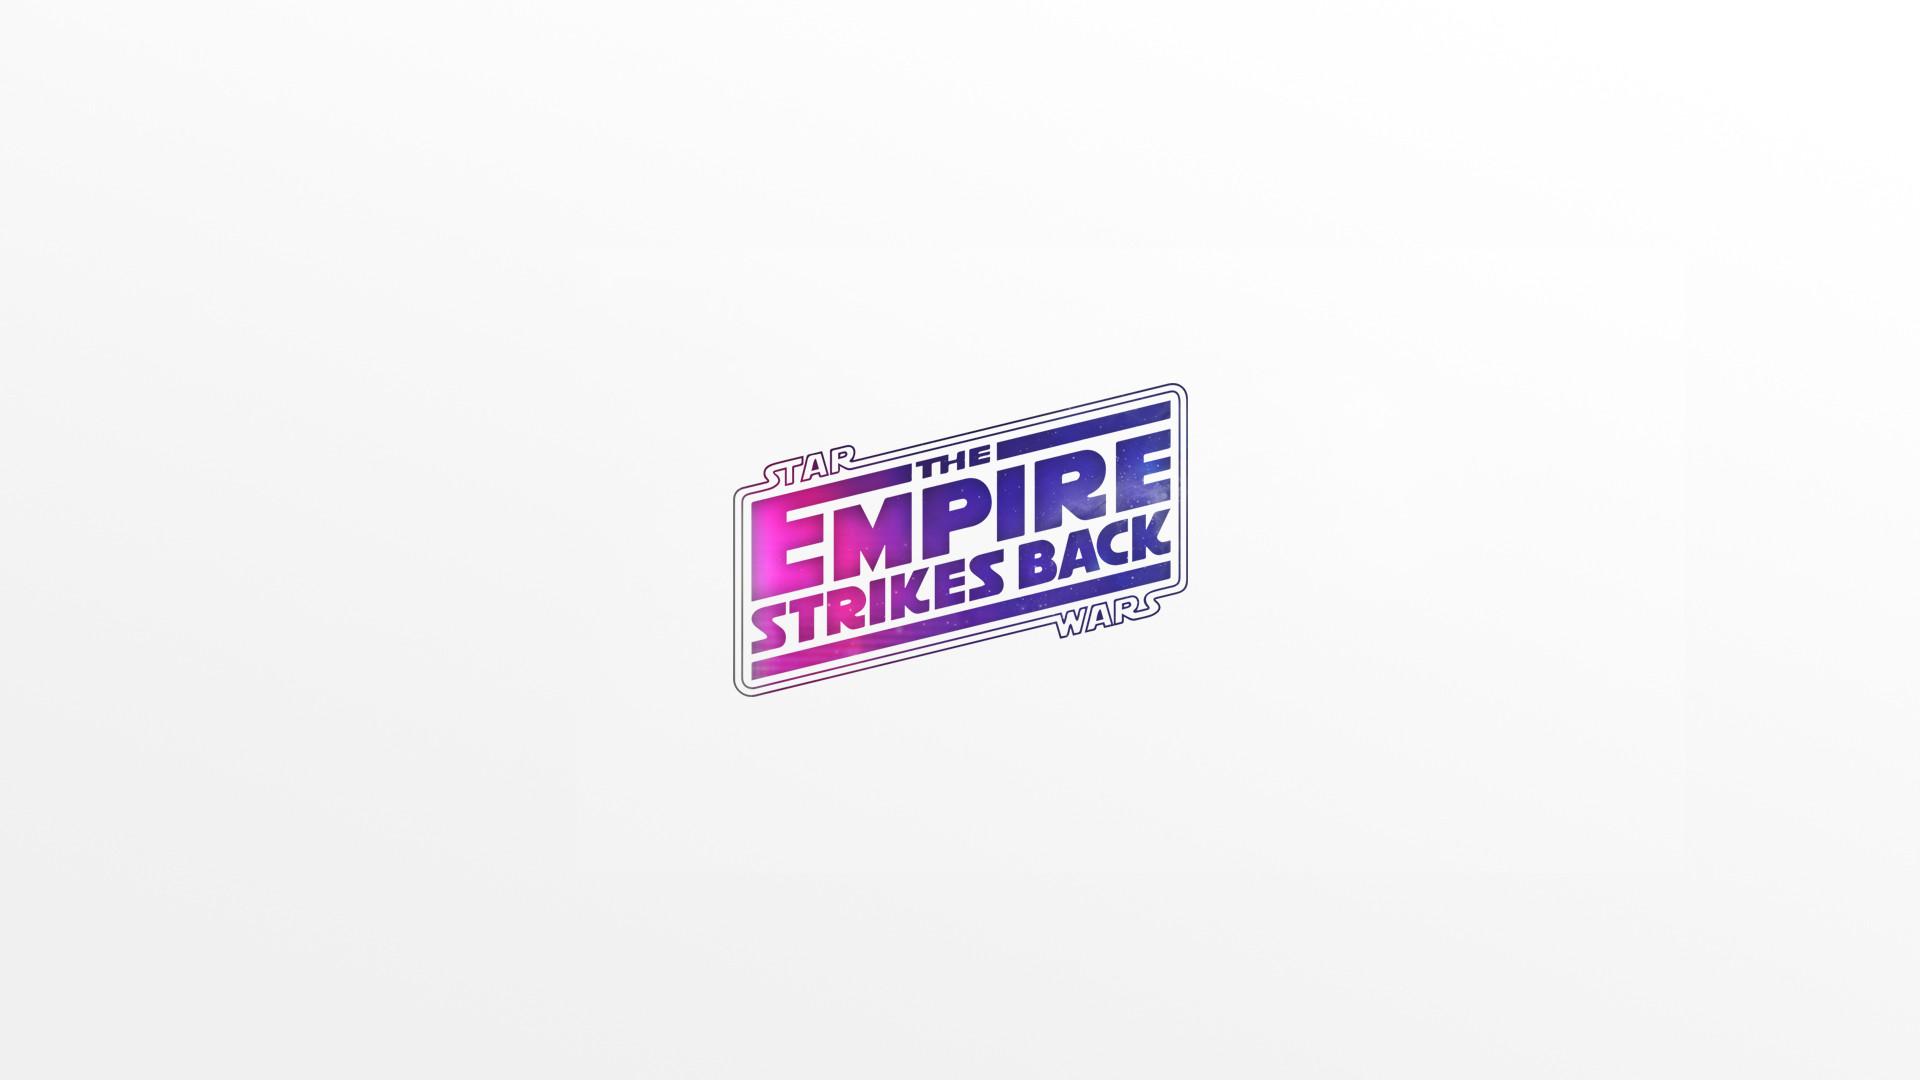 Star Wars Episode V The Empire Strikes Back Wallpapers, Pictures